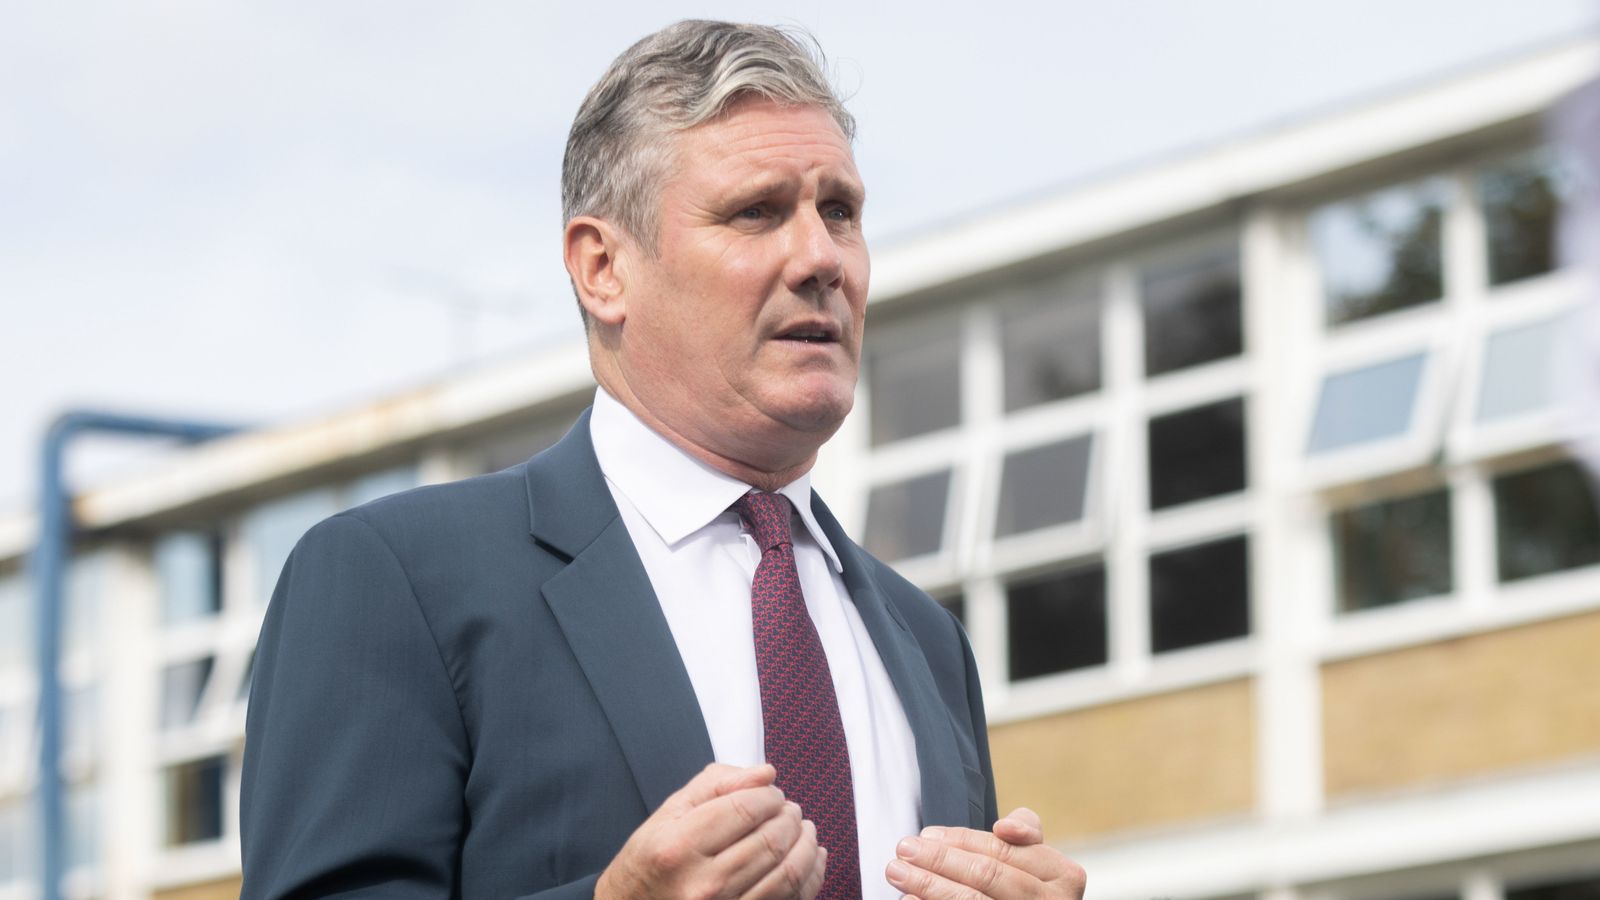 Sir Keir Starmer hopes to bring state schools up to private standards in first term 